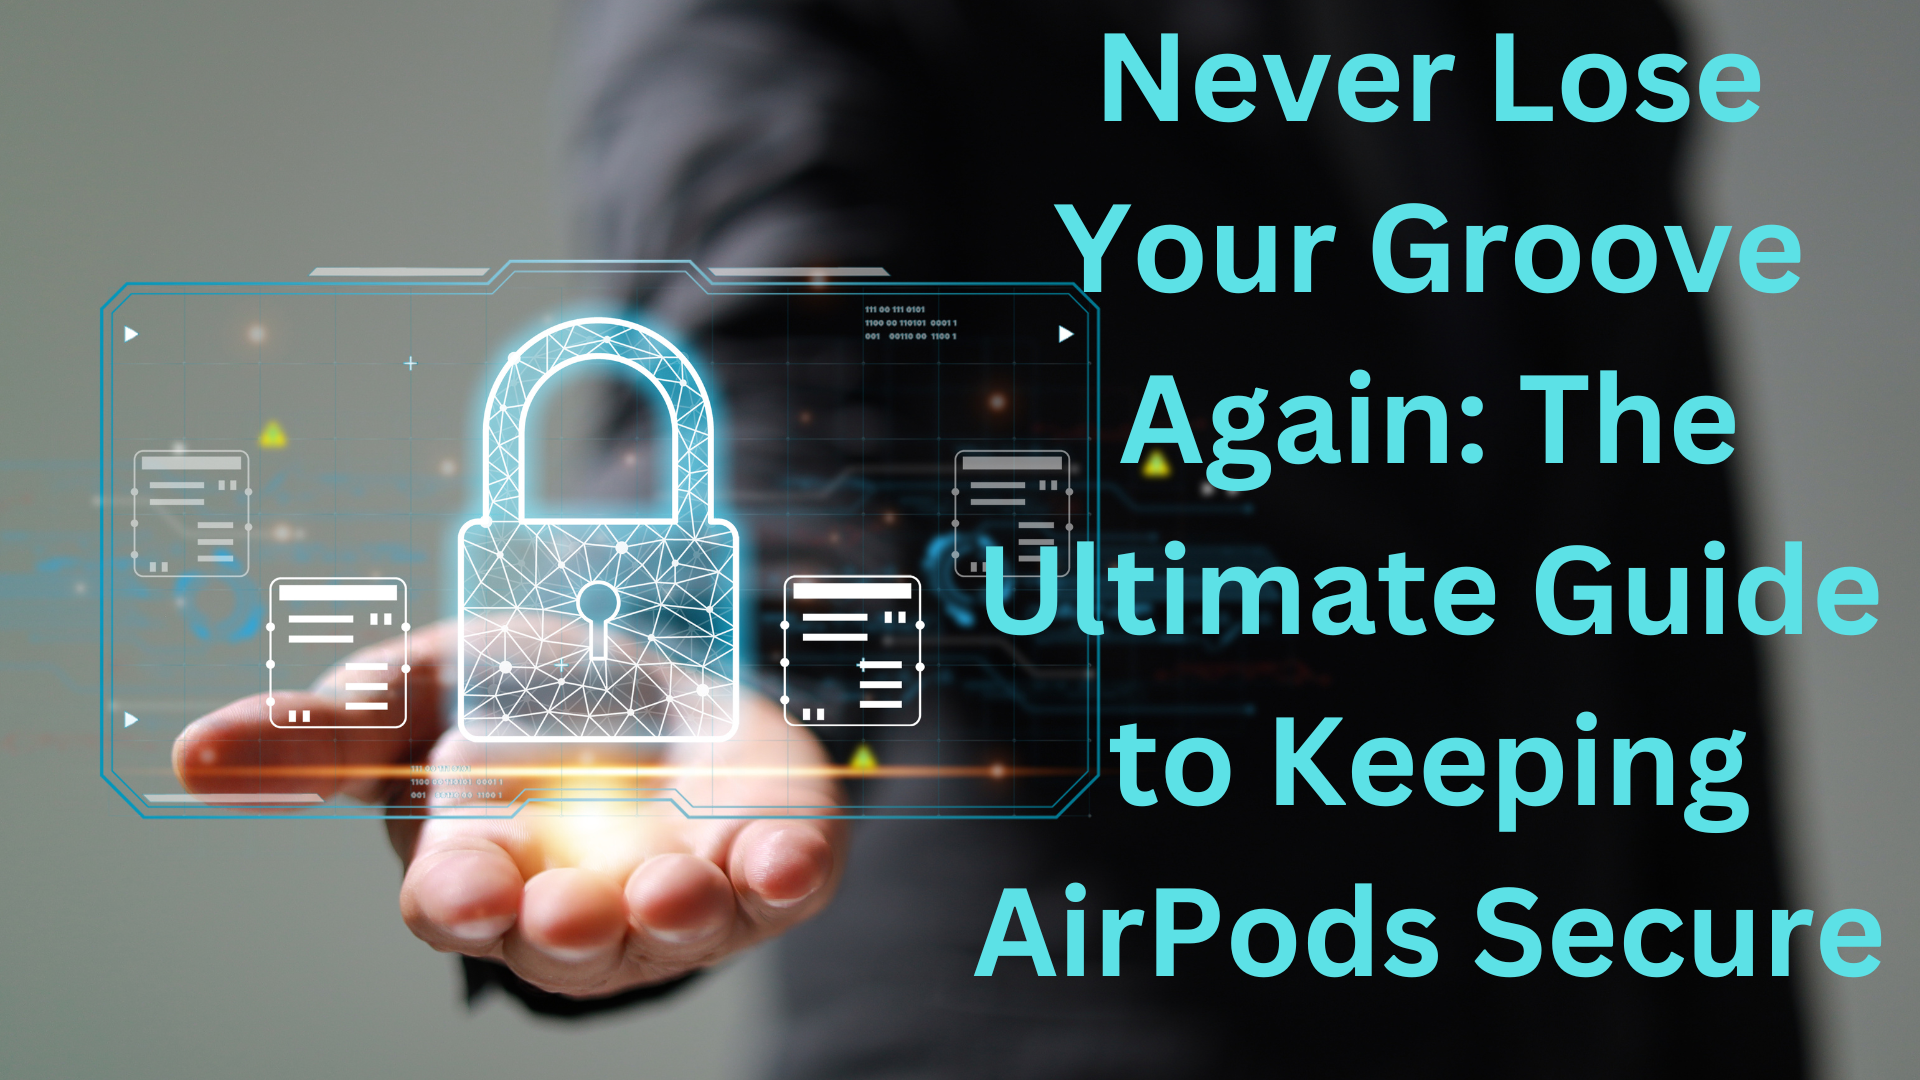 Never Lose Your Groove Again The Ultimate Guide to Keeping AirPods Secure